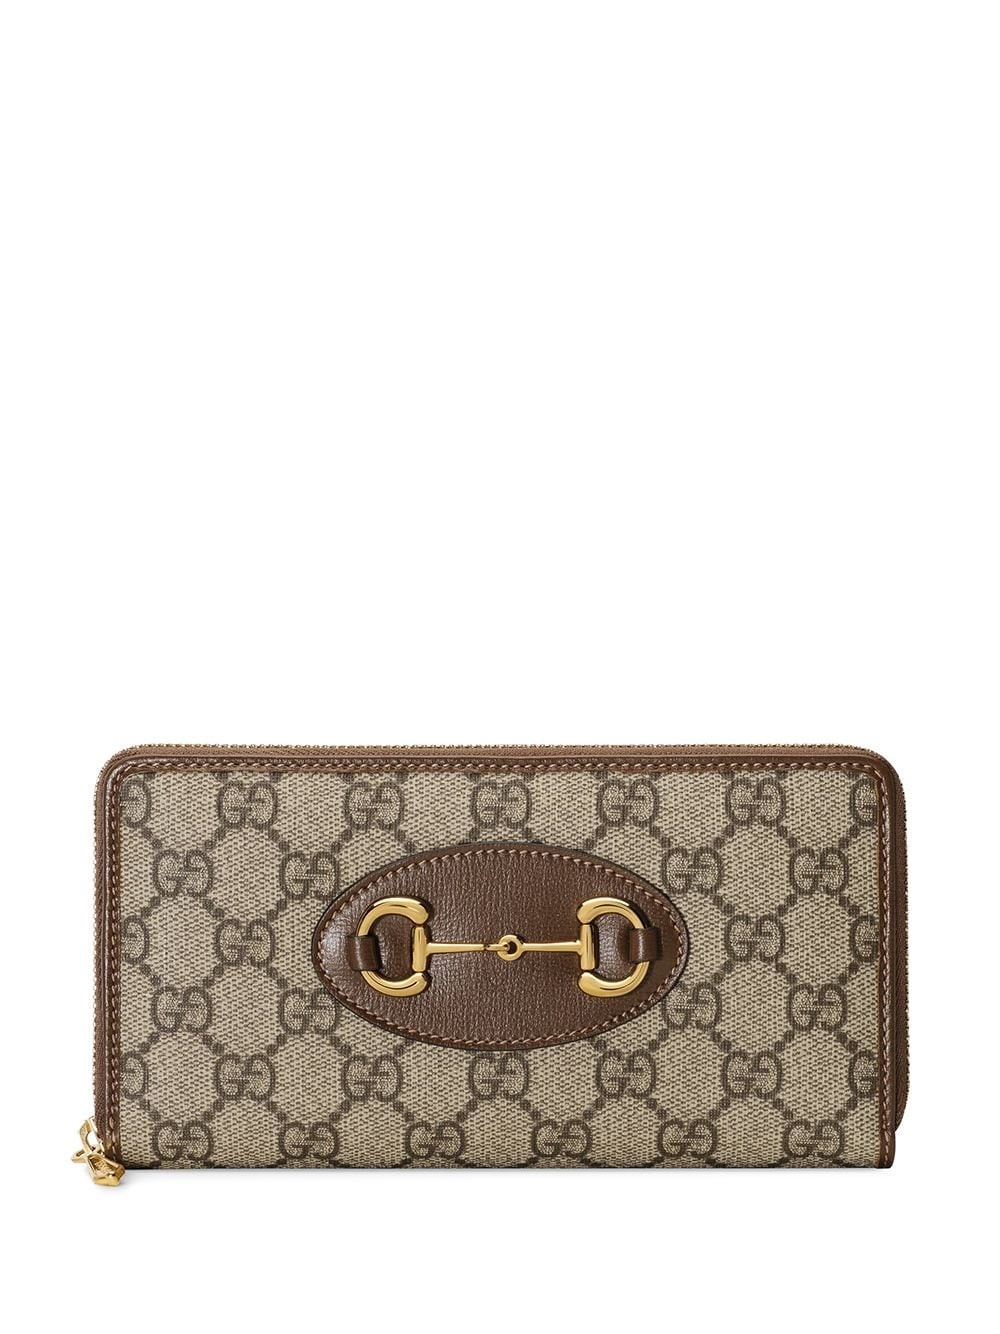 gucci LOGO WALLET available on montiboutique.com - 34081